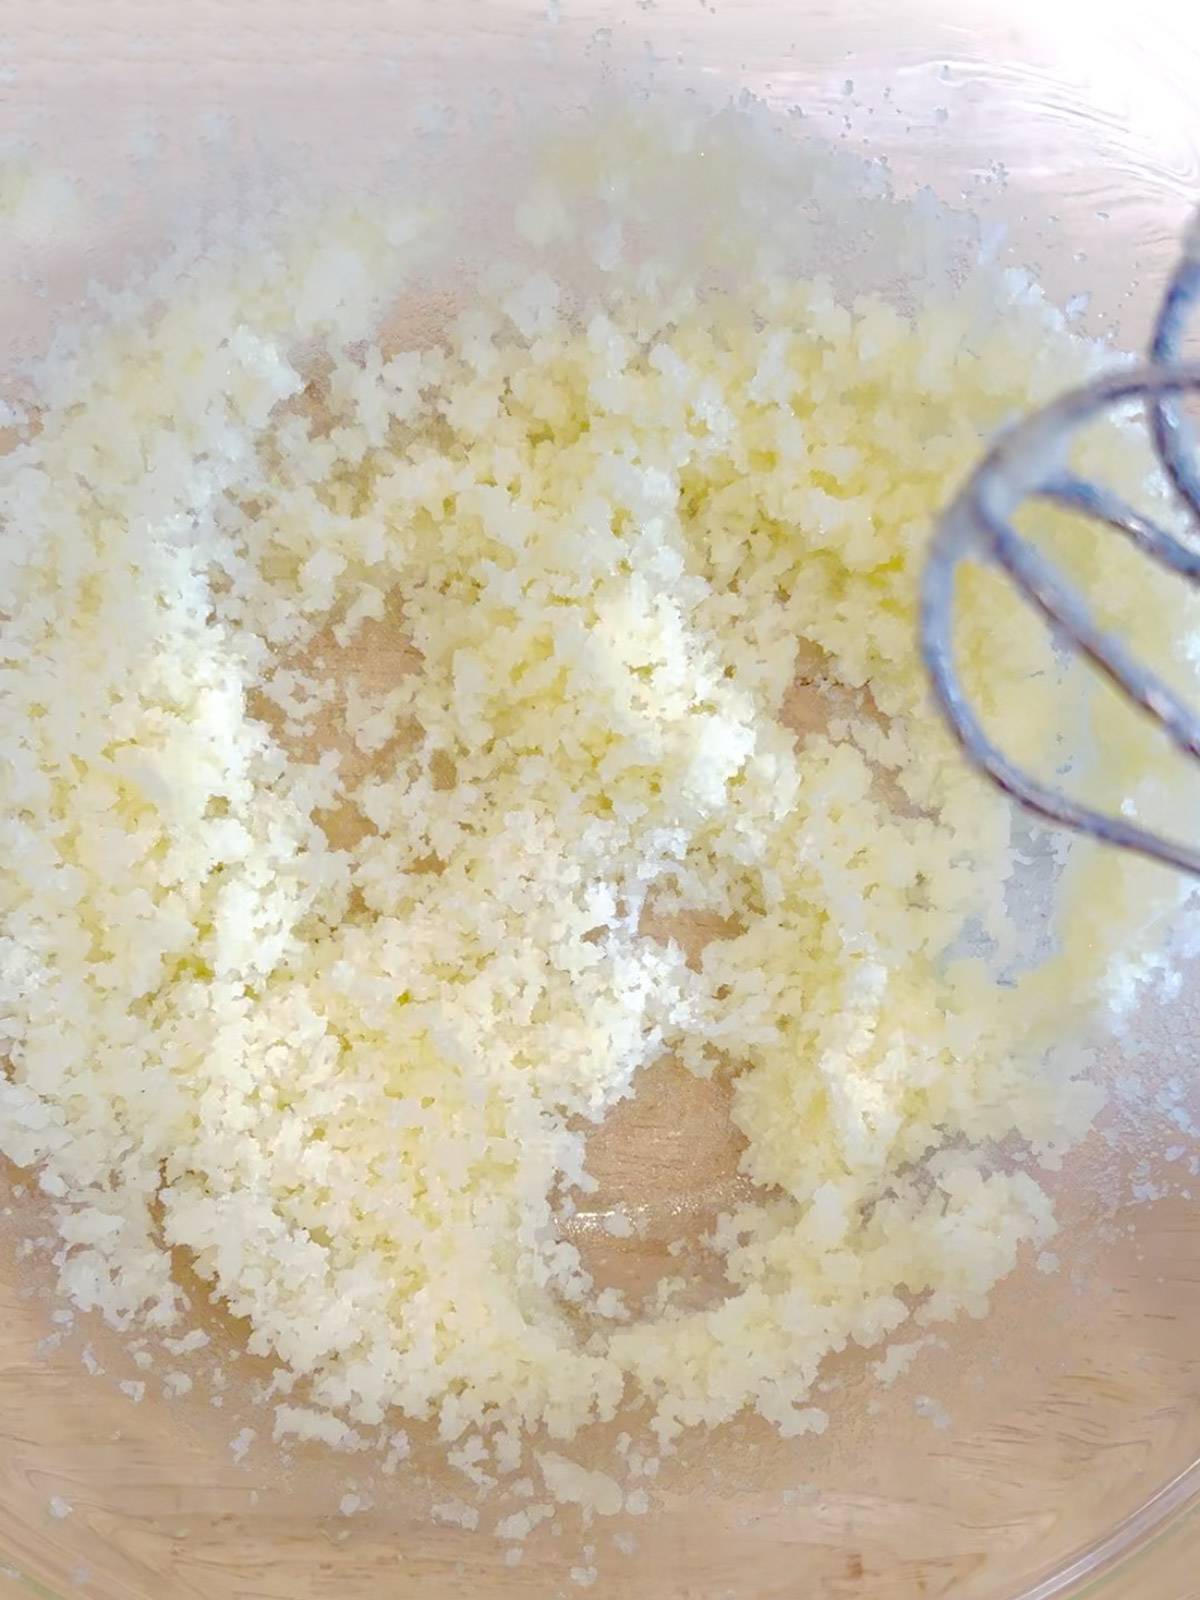 Mixing melted butter and sugar.